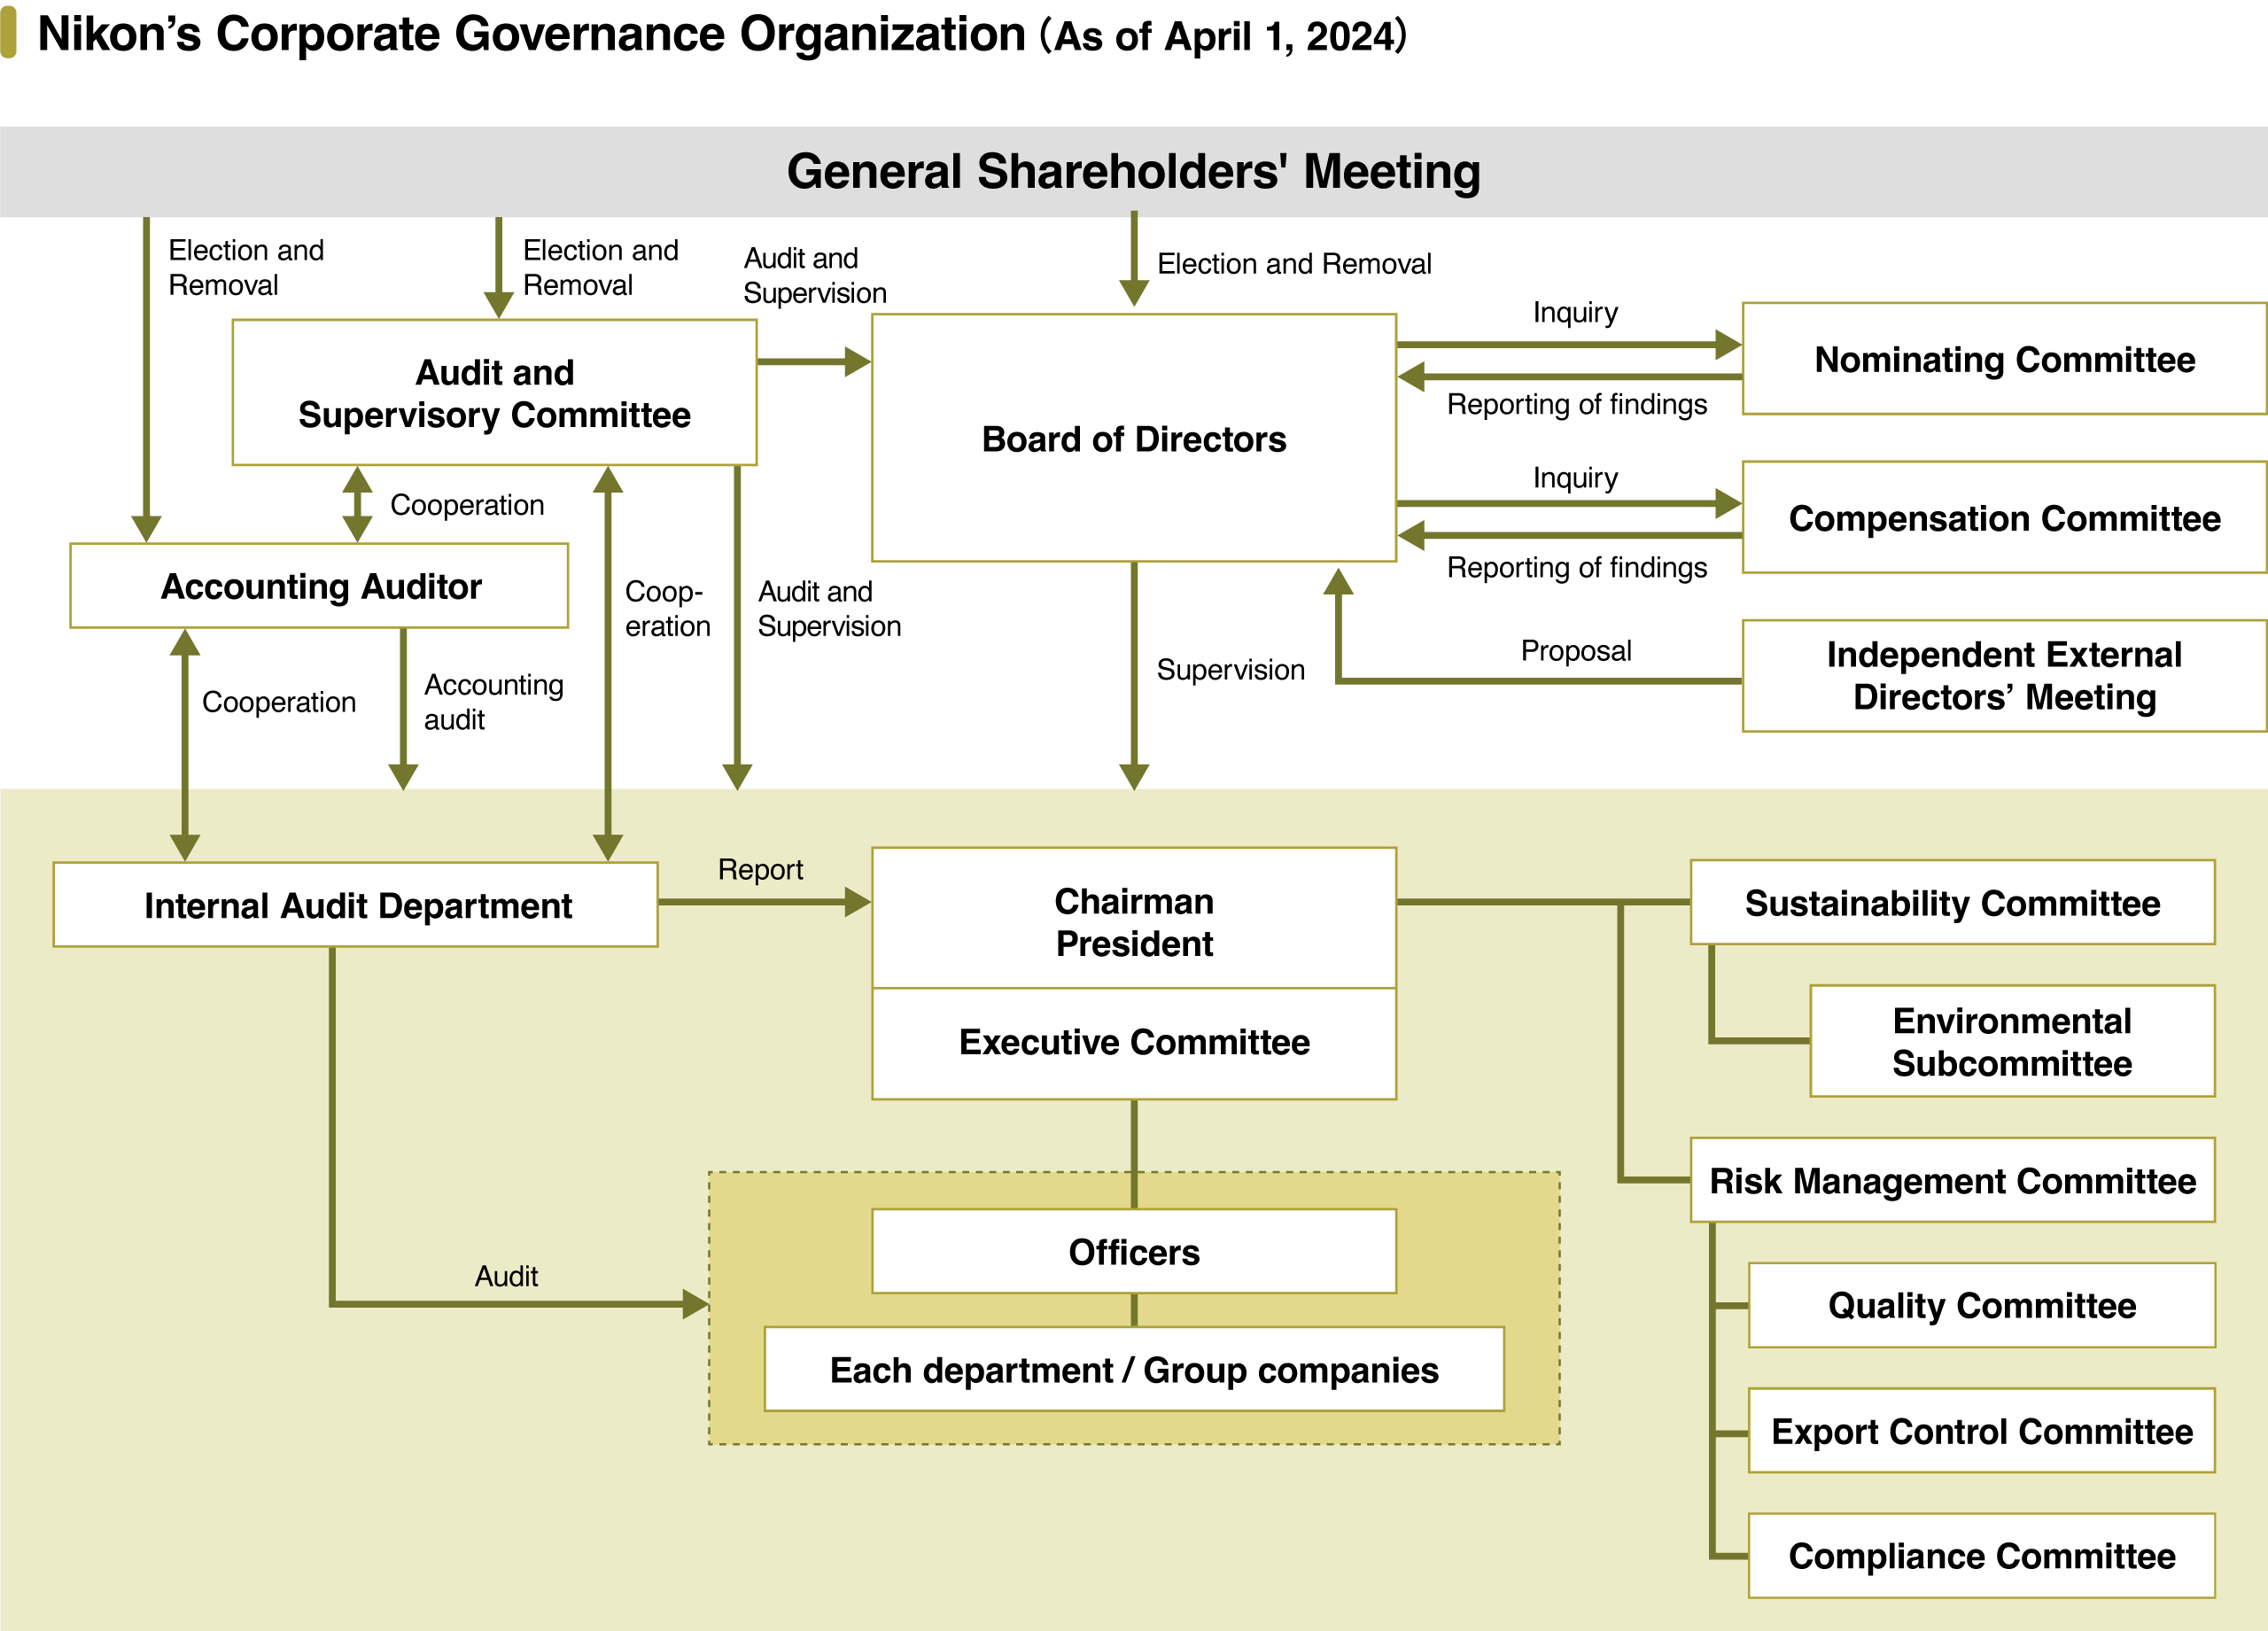 Nikon's Corporate Governance Organization System (As of June 24, 2024): The General Shareholders' Meeting elects and removes directors, Audit and Supervisory Committee members, and the Accounting Auditor. The Board of Directors submits inquiries to the Nominating Committee and the Compensation Committee, and they report their findings to the Board of Directors. The Independent External Directors' Meeting submits proposals to the Board of Directors. The Board of Directors also supervises the Executive Committee and various other committees etc., including the Sustainability Committee. The Audit and Supervisory Committee audits and supervises the Board of Directors, the Executive Committee and various other committees etc., including the Sustainability Committee, and cooperates with the Accounting Auditor and the Internal Audit Department. The Accounting Auditor audits the Executive Committee and various other committees etc., including the Sustainability Committee, and cooperates with the Internal Audit Department. The Internal Audit Department reports to the Chairman and President, Executive Committee, and audits officers and departments/group companies. The Sustainability Committee and the Risk Management Committee are under the control of the Chairman and President, and the Environmental Subcommittee and Supply Chain Subcommittee are under the control of the Sustainability Committee. The Quality Committee, Export Control Committee and Compliance Committee are under the control of the Risk Management Committee.